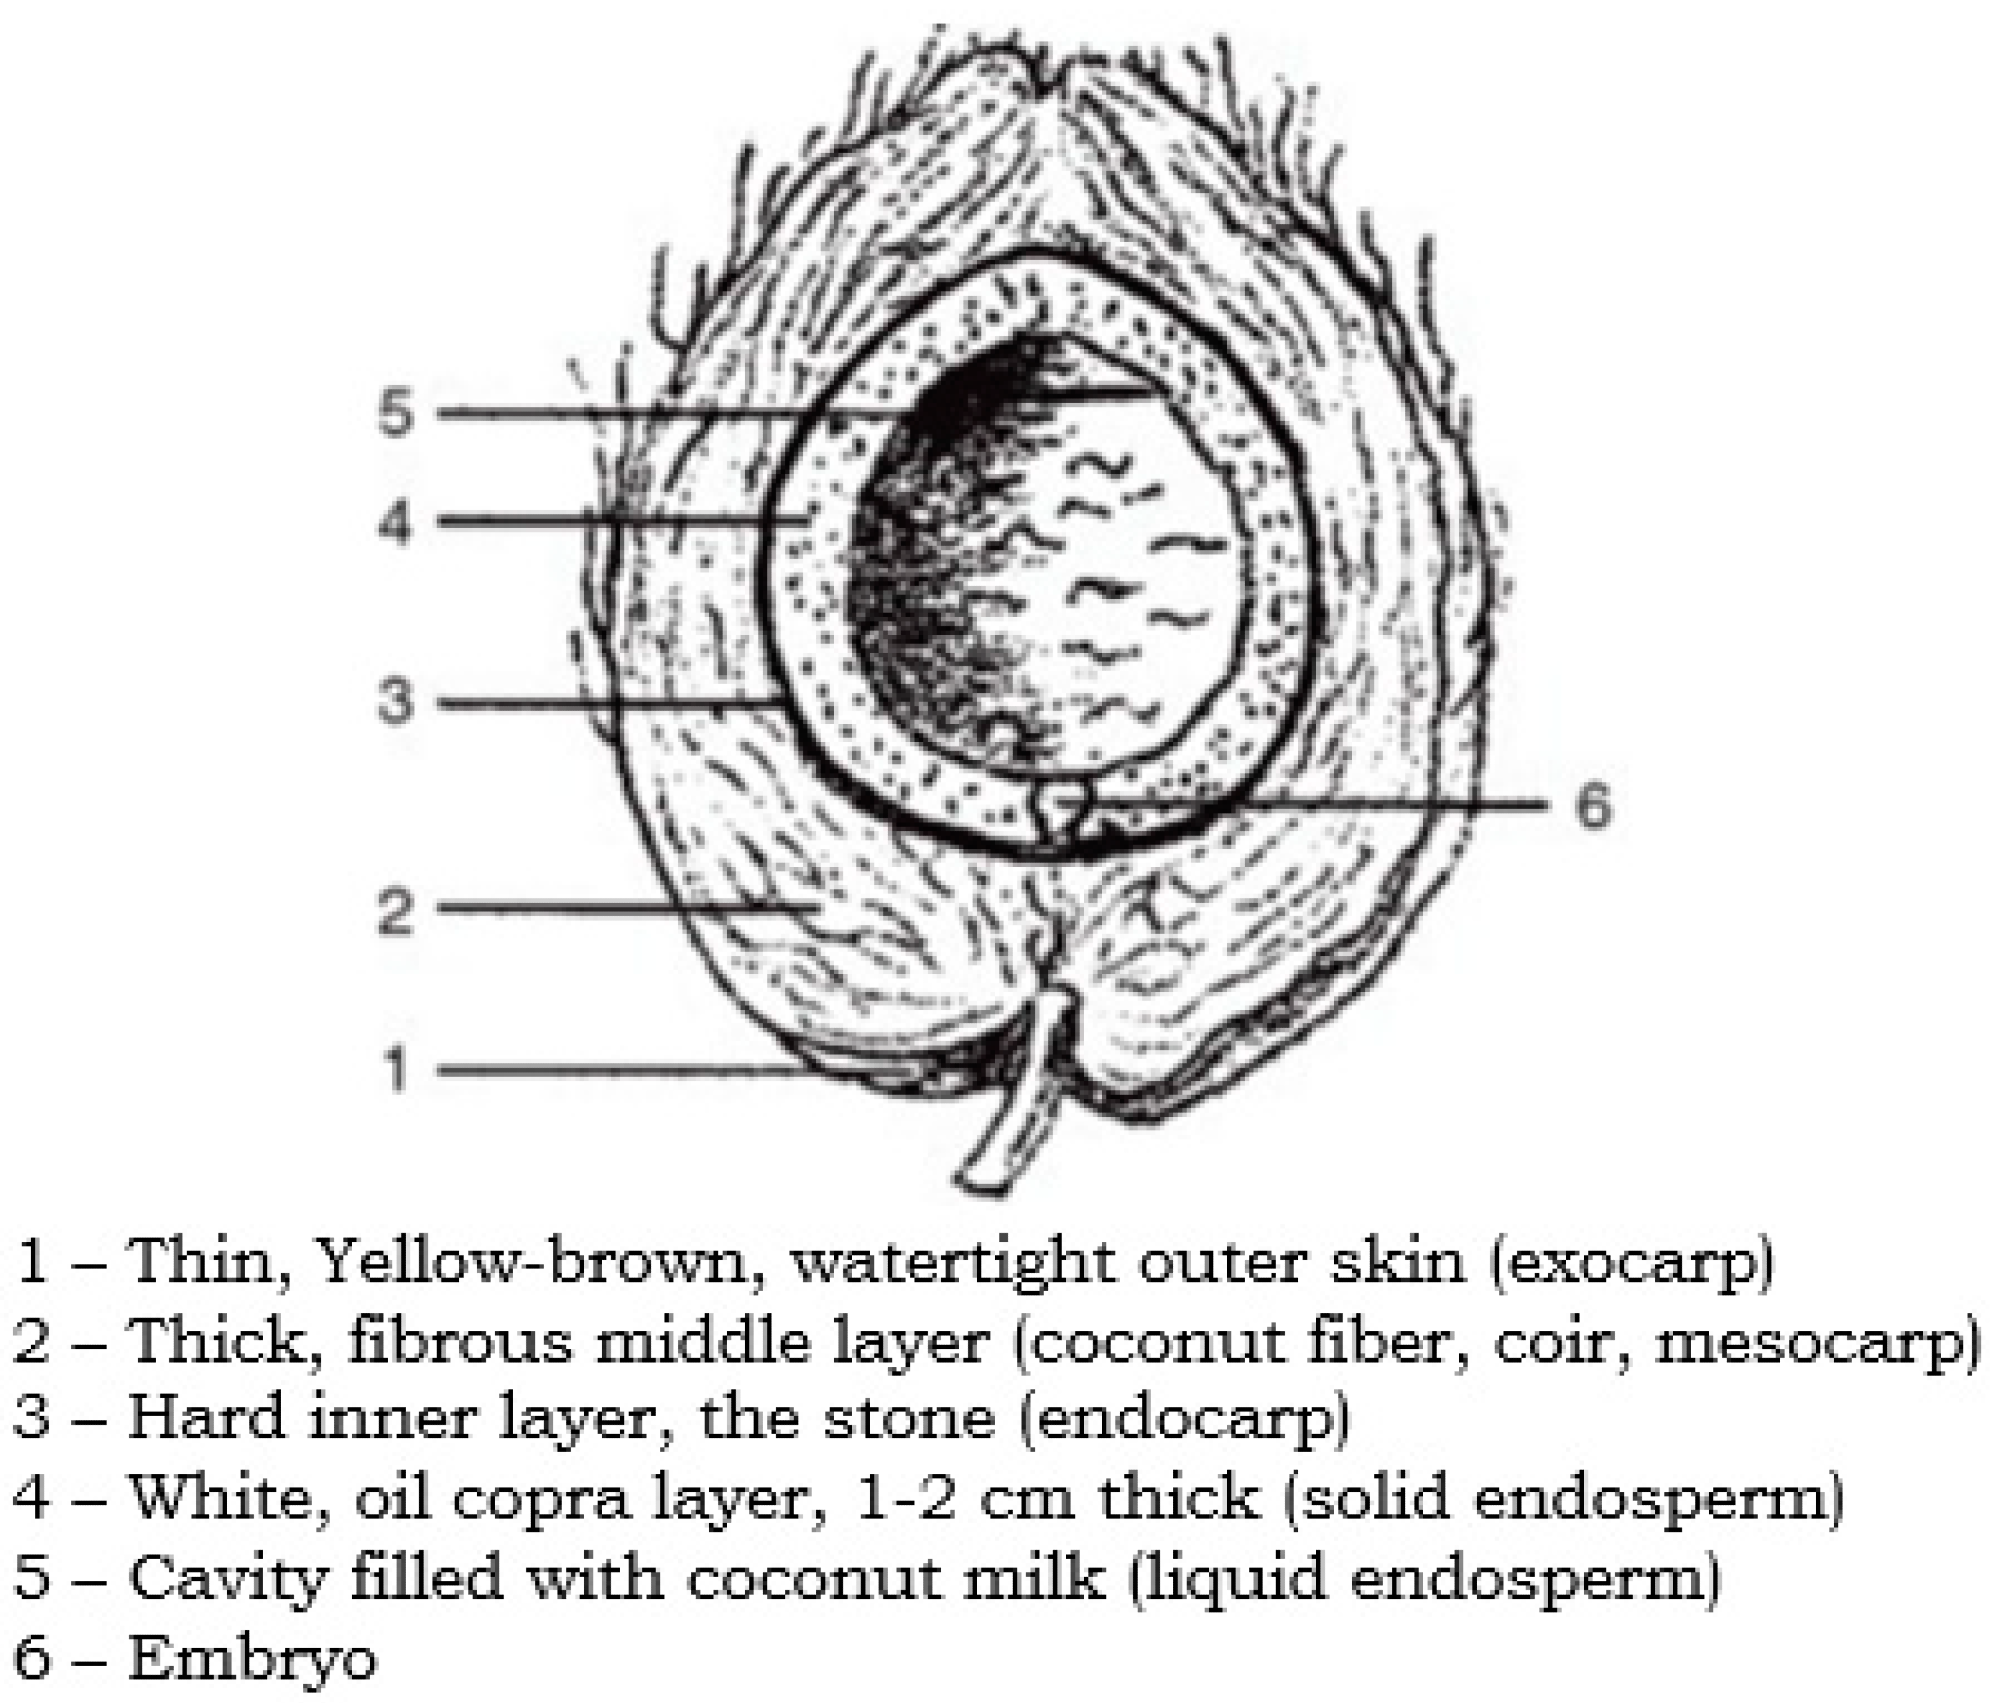 Coconut longitudinal section (adapted from [37]).